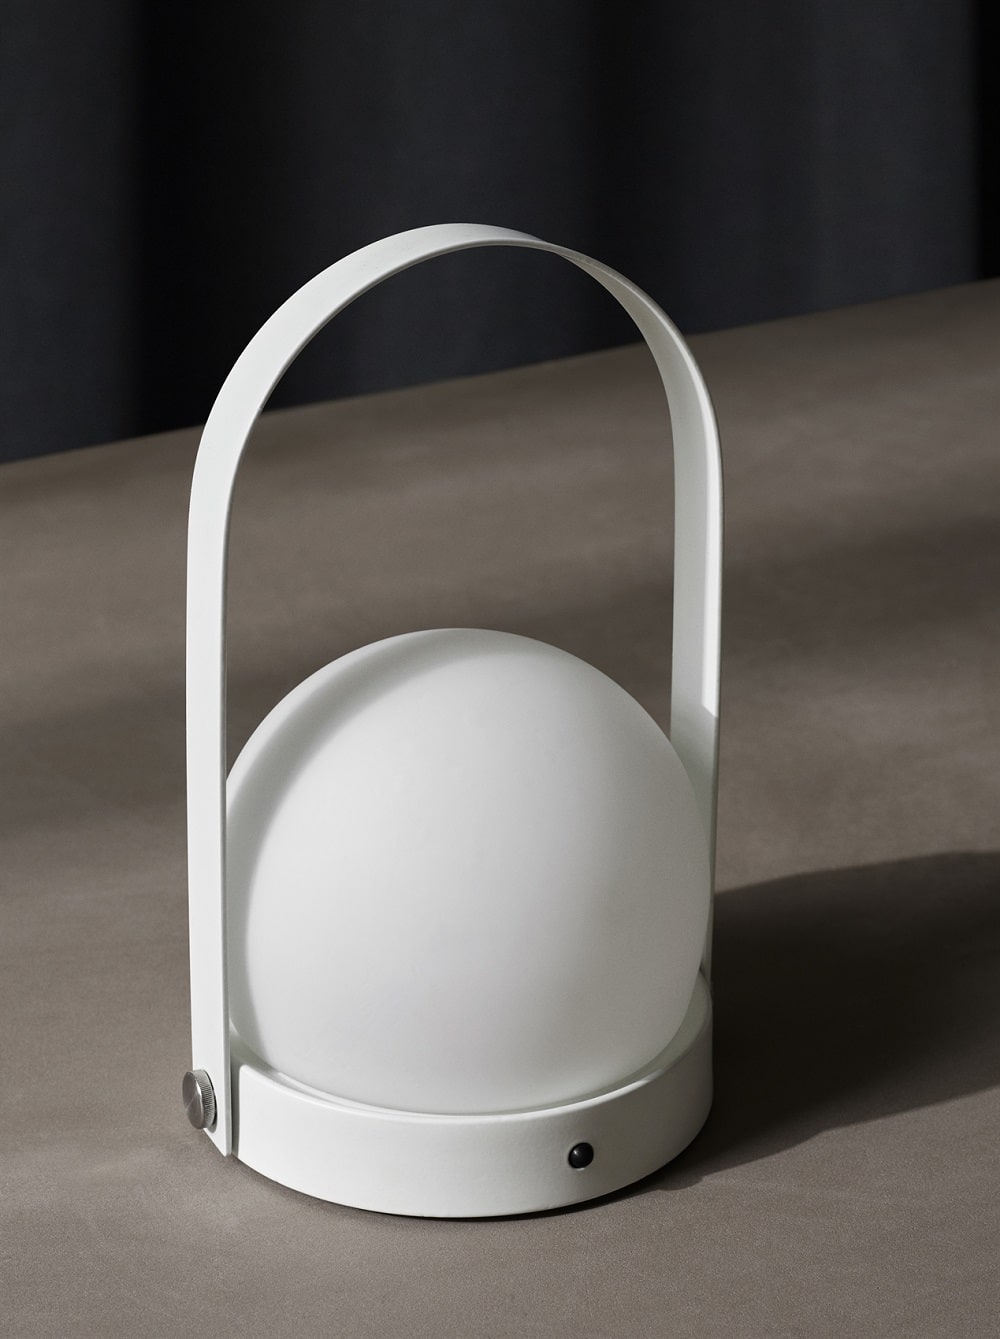 MENU White Carrie Portable Table Lamp Designed by Norm Architects